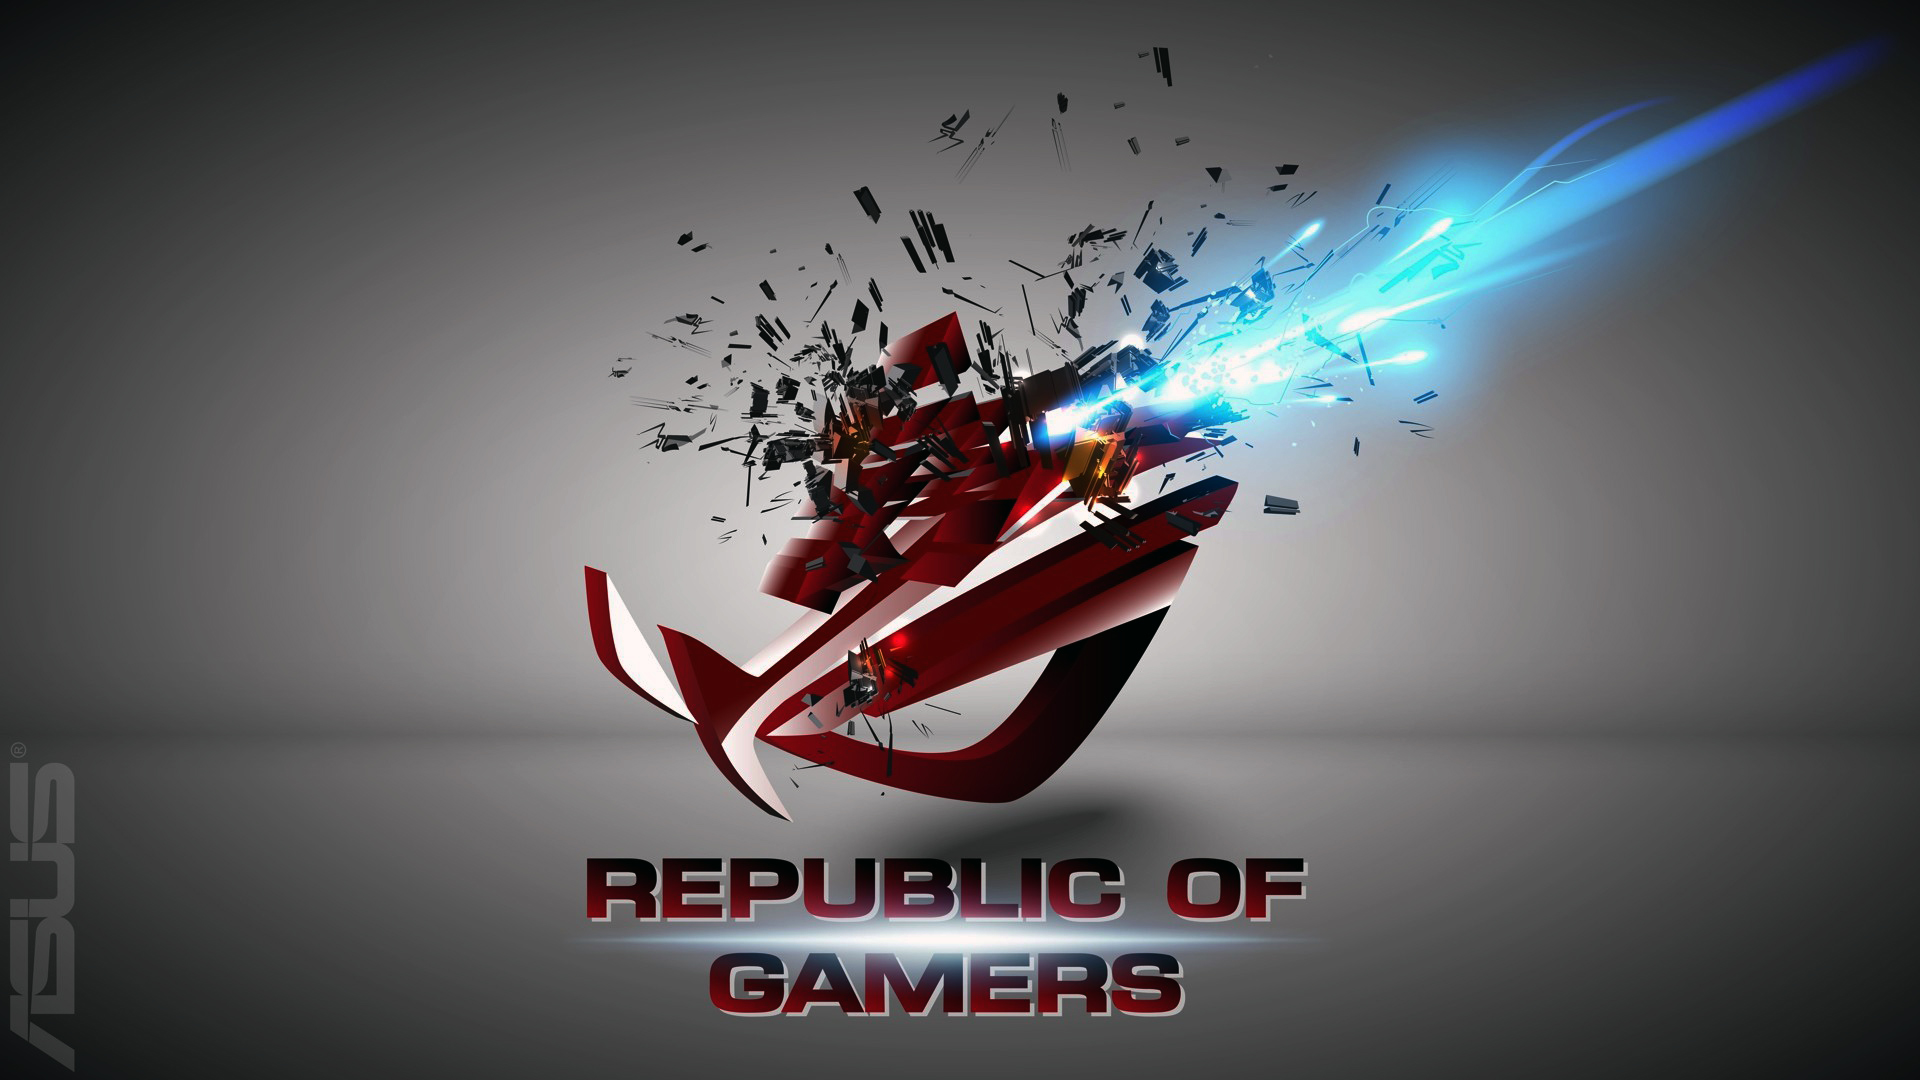 Free download asus rog republic of gamers logo shattered explosion hd